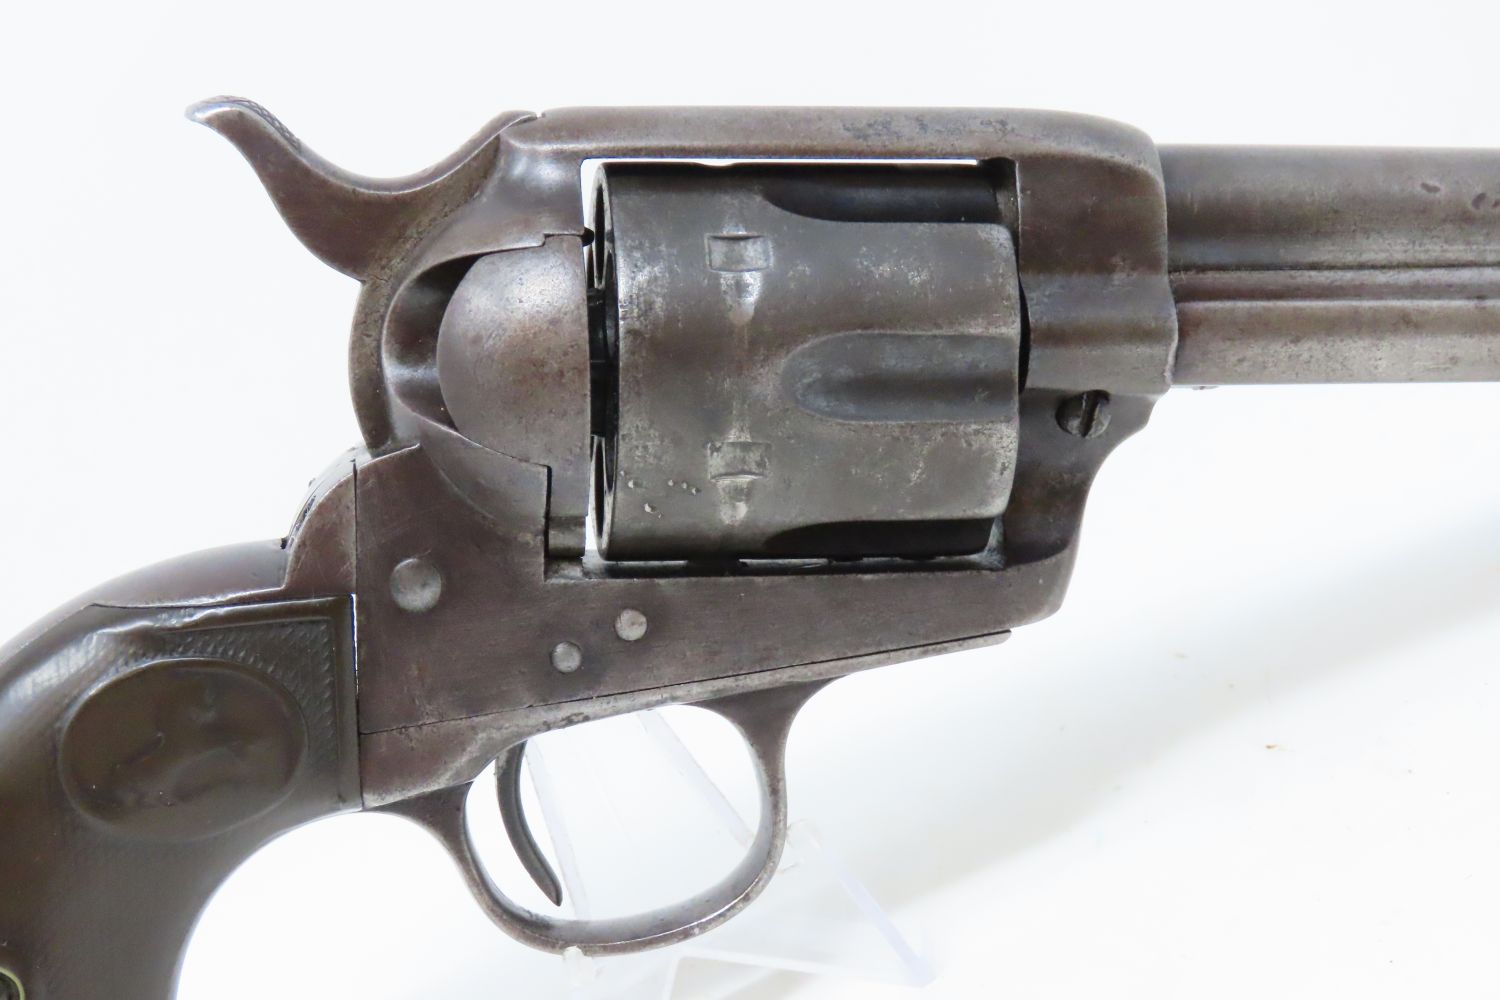 COLT Single Action Army “PEACEMAKER” Chambered in .41 Long Colt 